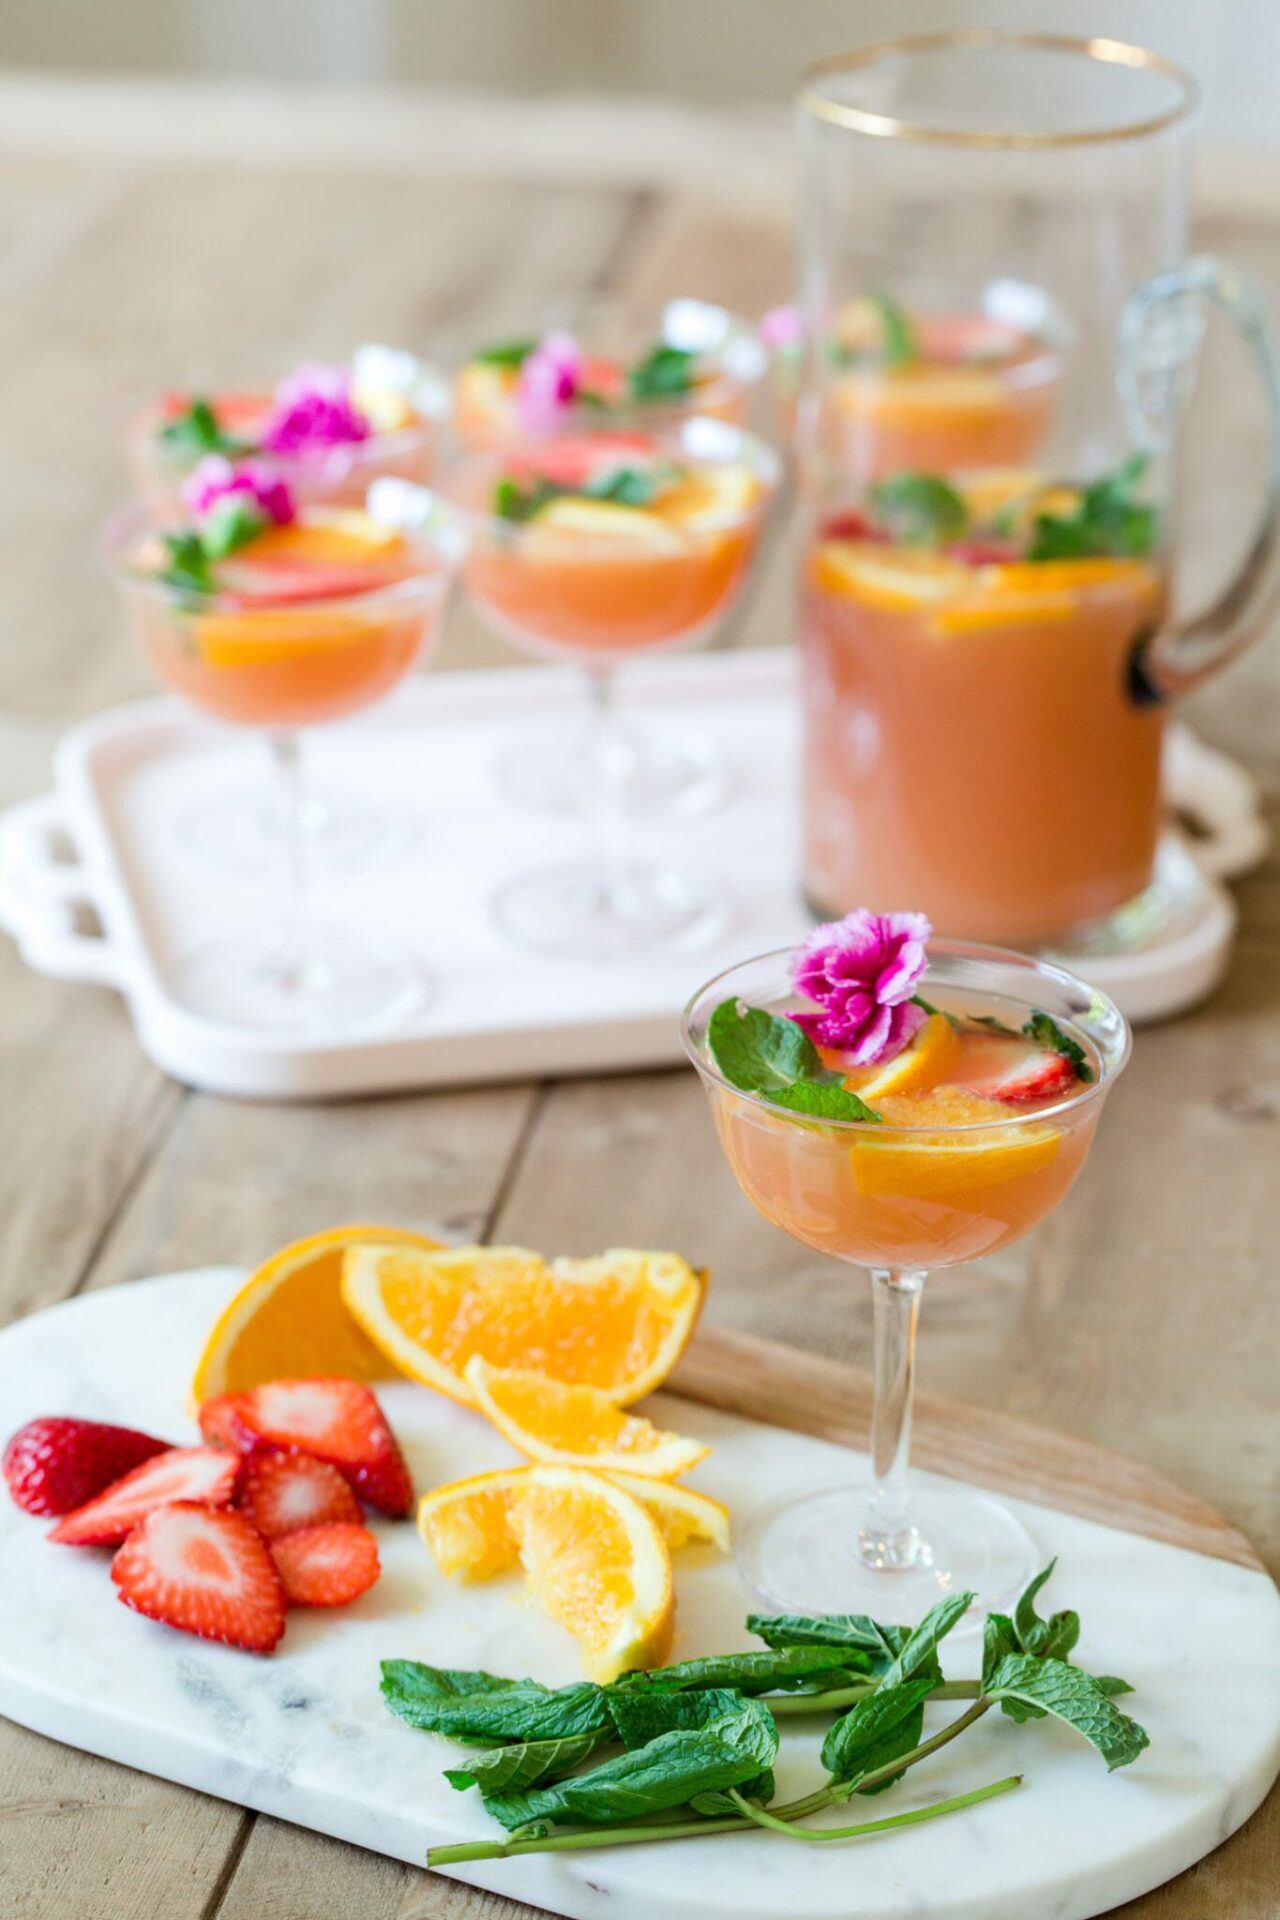 Brunch Punch Champagne Cocktail | homemade cocktail recipes | summer cocktails | easy cocktail recipes | brunch drink recipes || JennyCookies.com #recipe #brunch #cocktail #champagnecocktail #drinkrecipes #summerdrinks #summercocktail #jennycookies